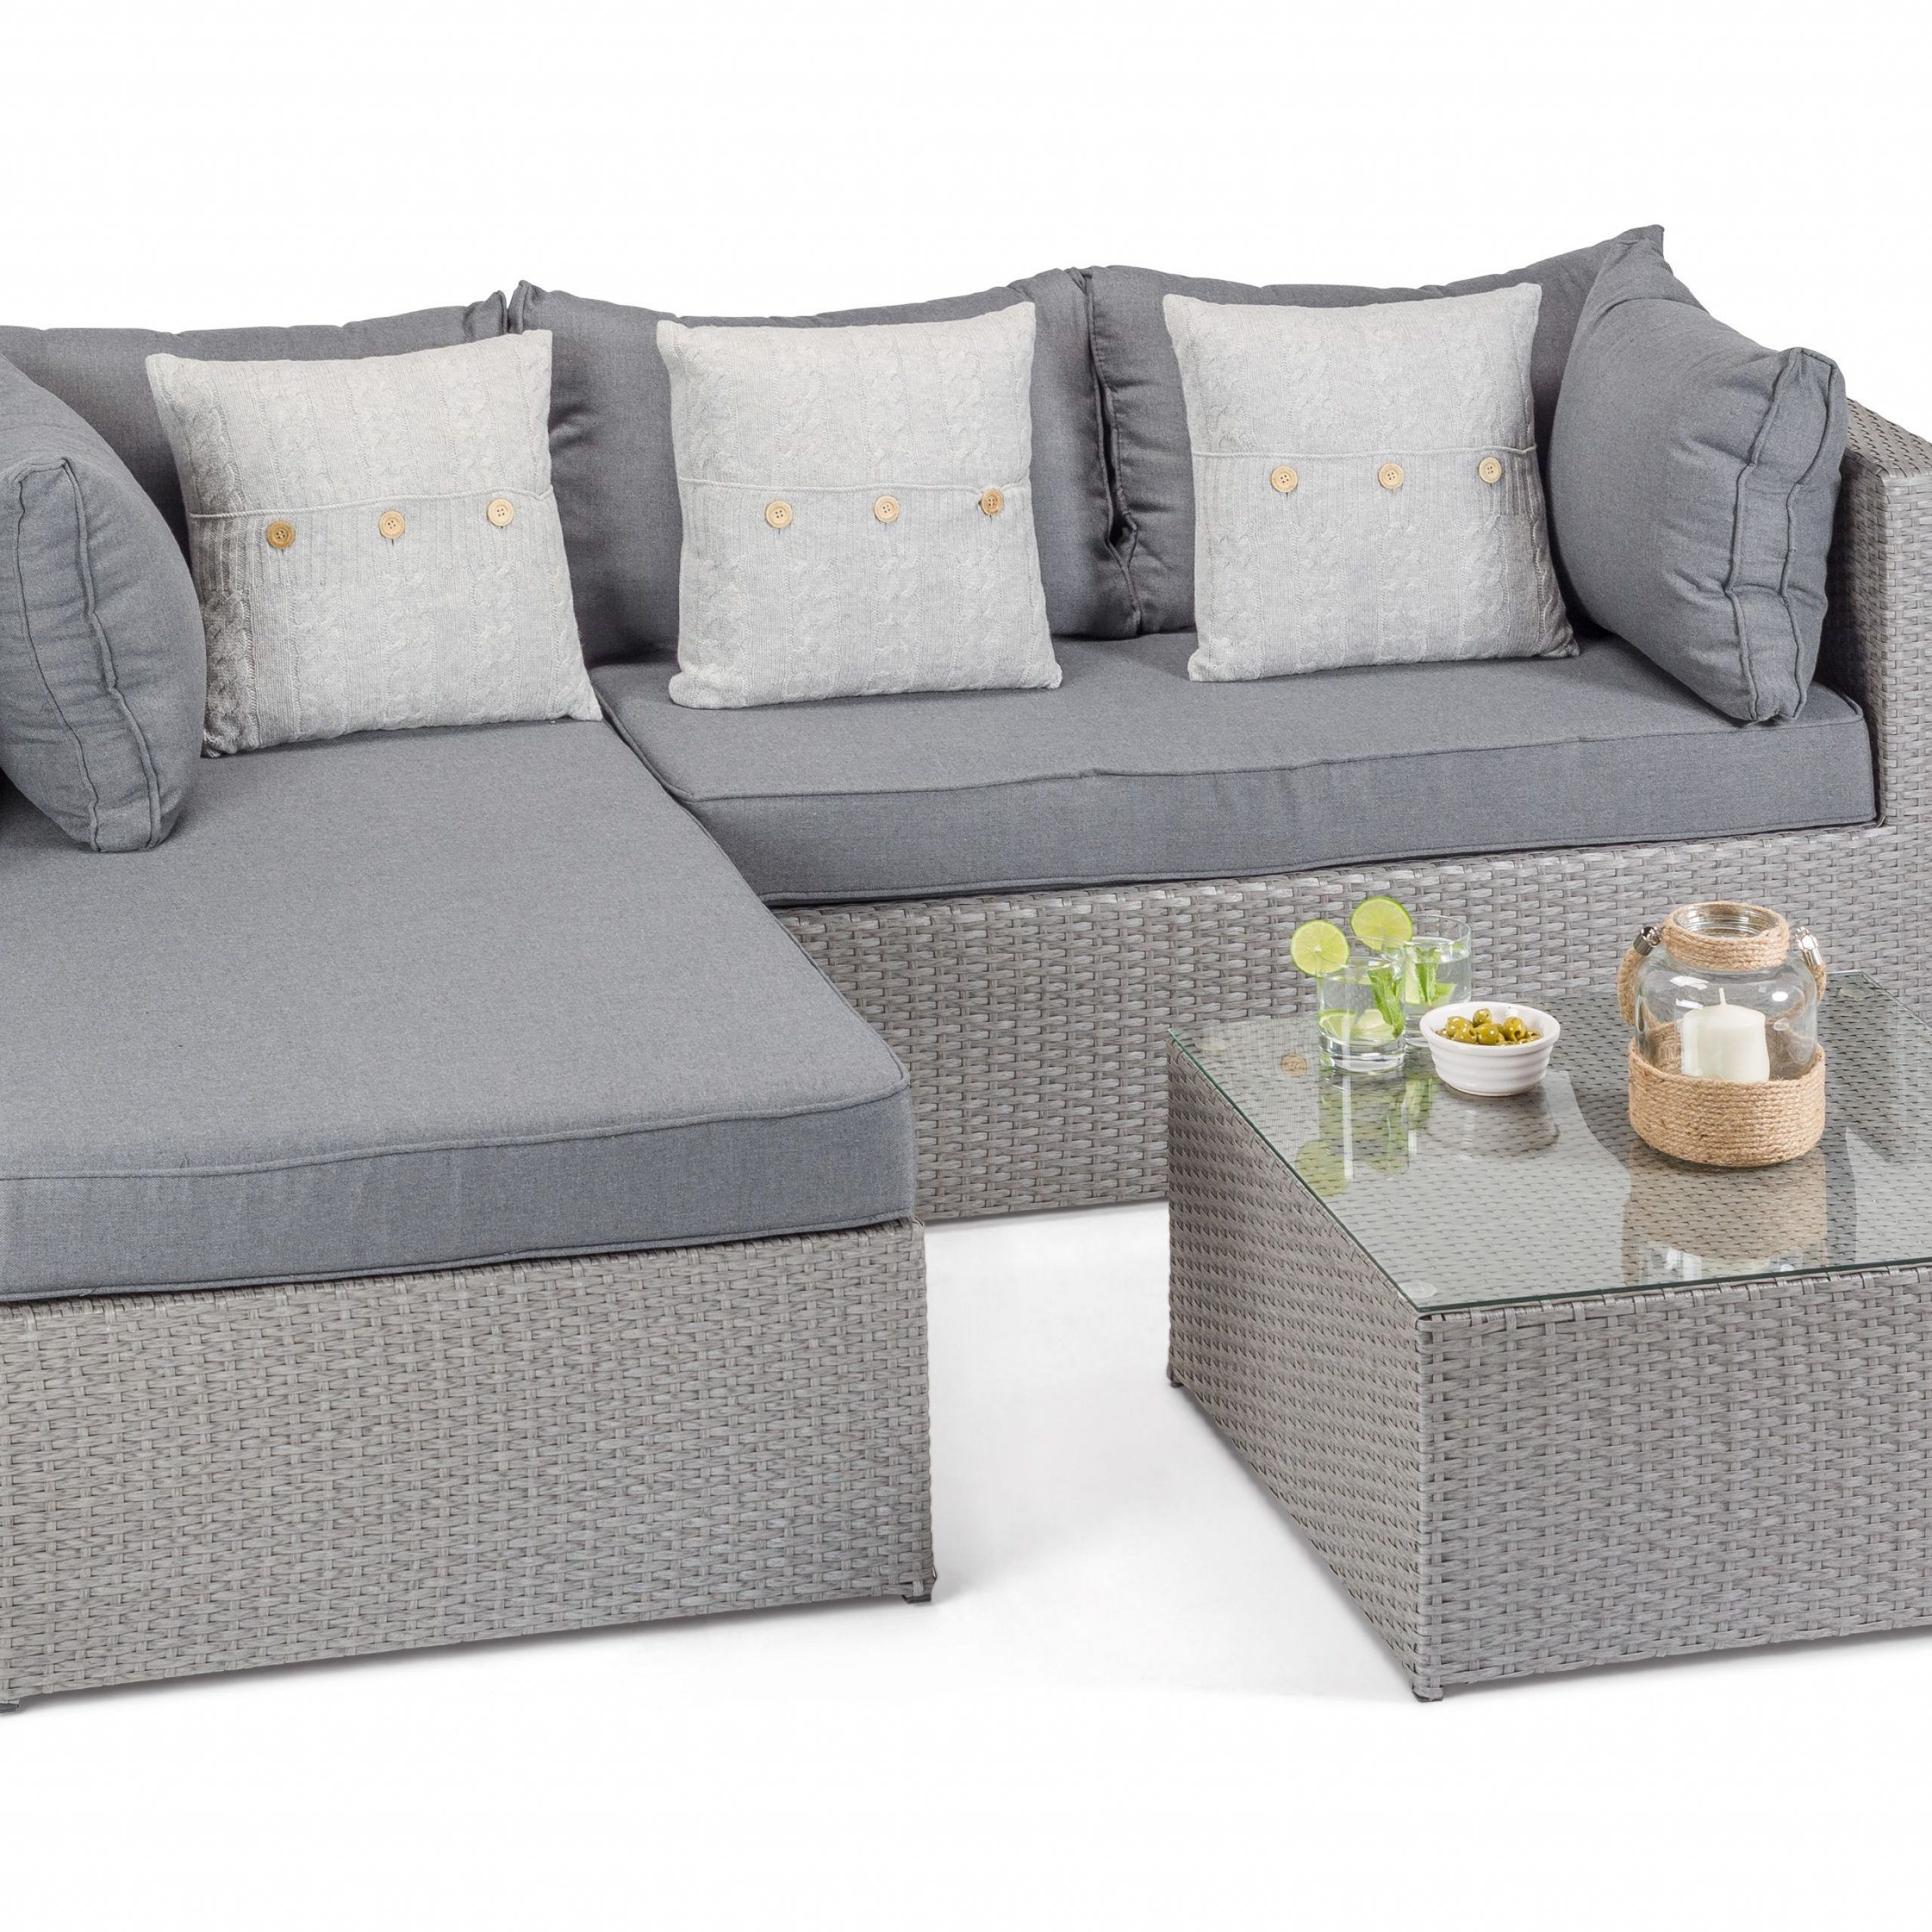 3 Piece Outdoor Table And Loveseat Sets In Current Calabria Grey Rattan 3 Piece Sofa Set With Coffee Table – Alexander (View 13 of 15)